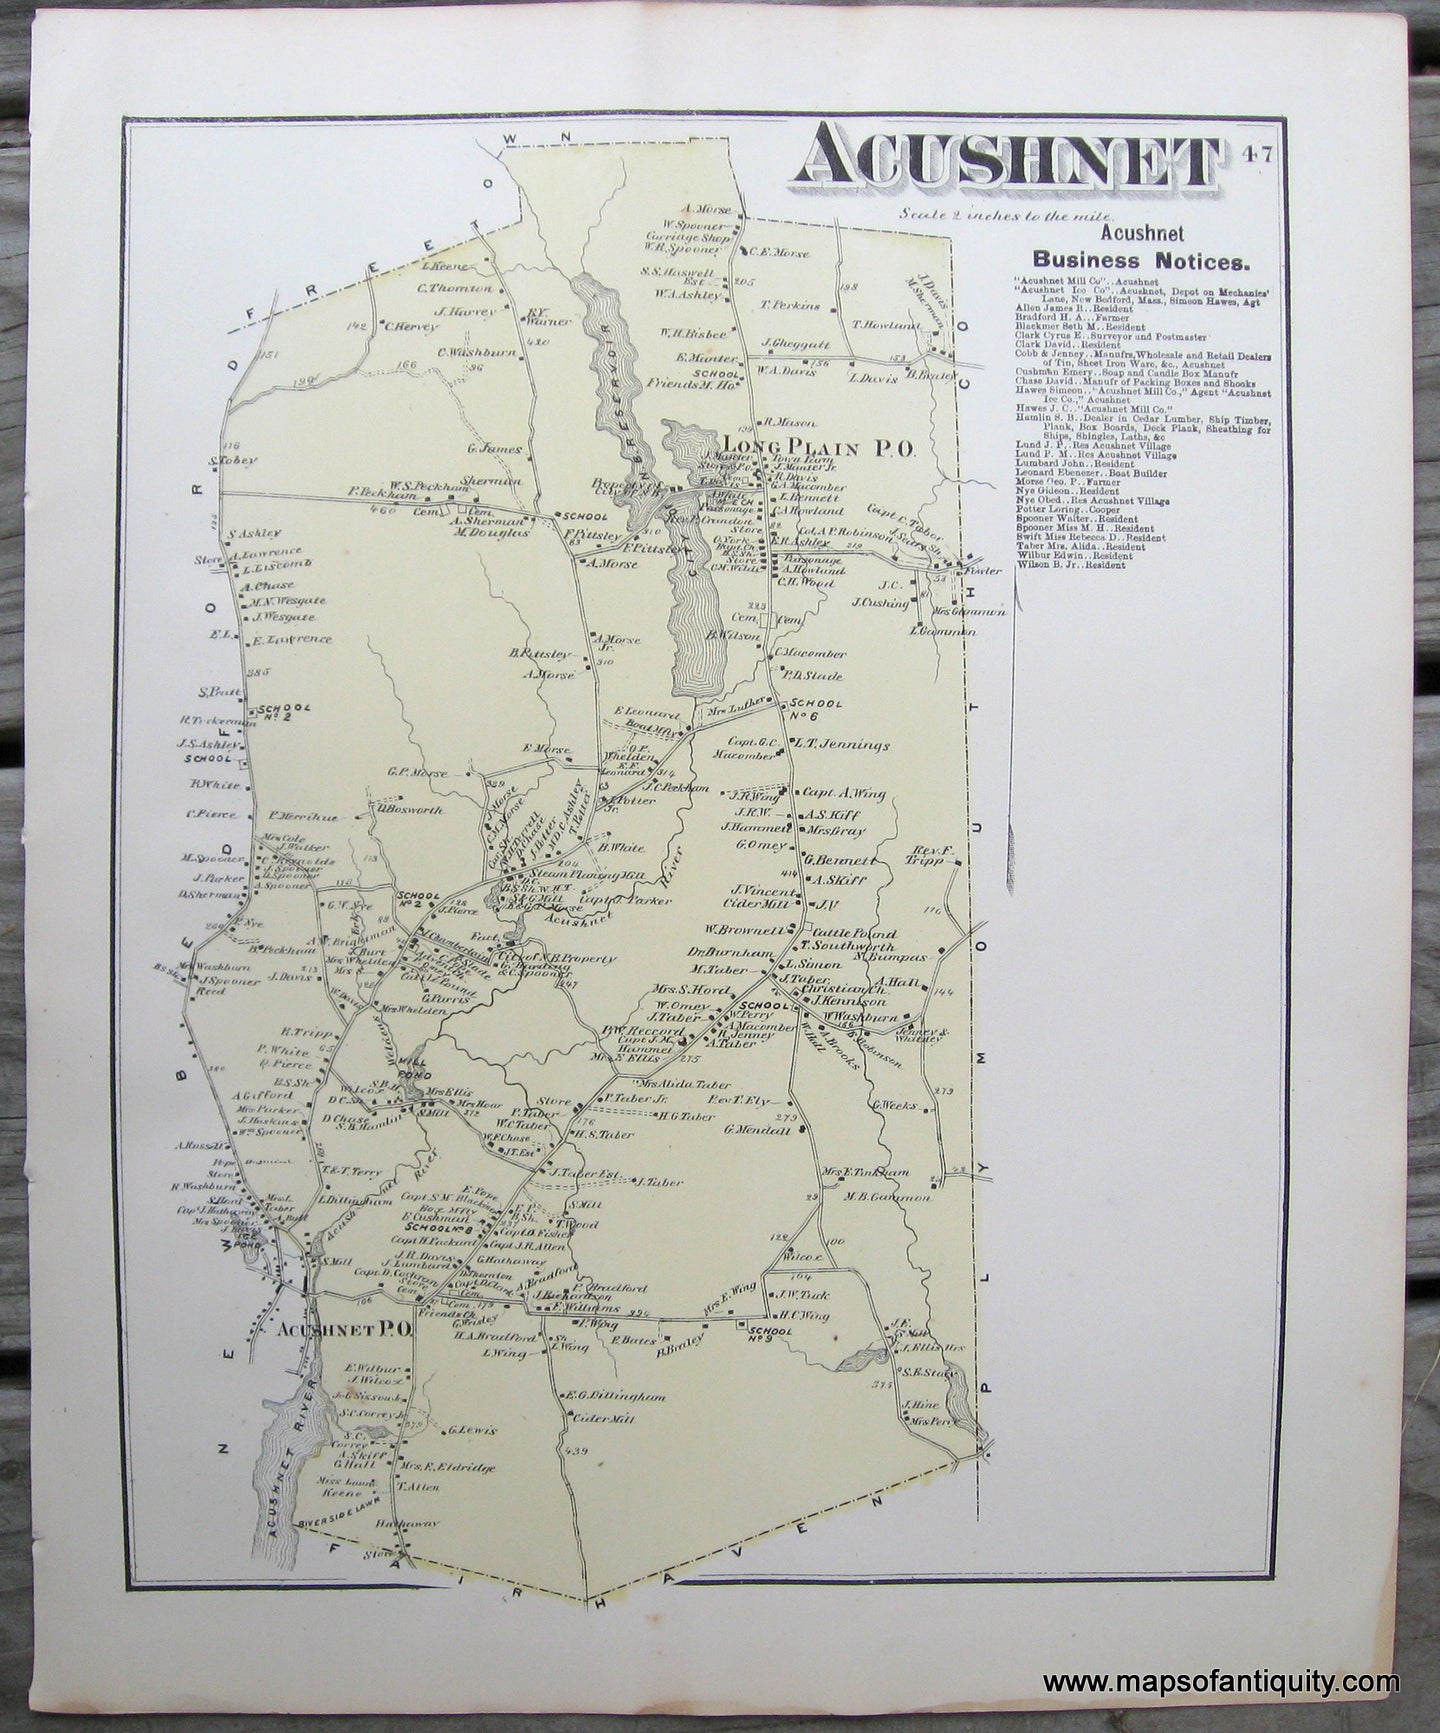 Antique-Hand-Colored-Map-Township-map-of-Acushnet-MA.-P.-47-1871-Beers-Bristol-1800s-19th-century-Maps-of-Antiquity